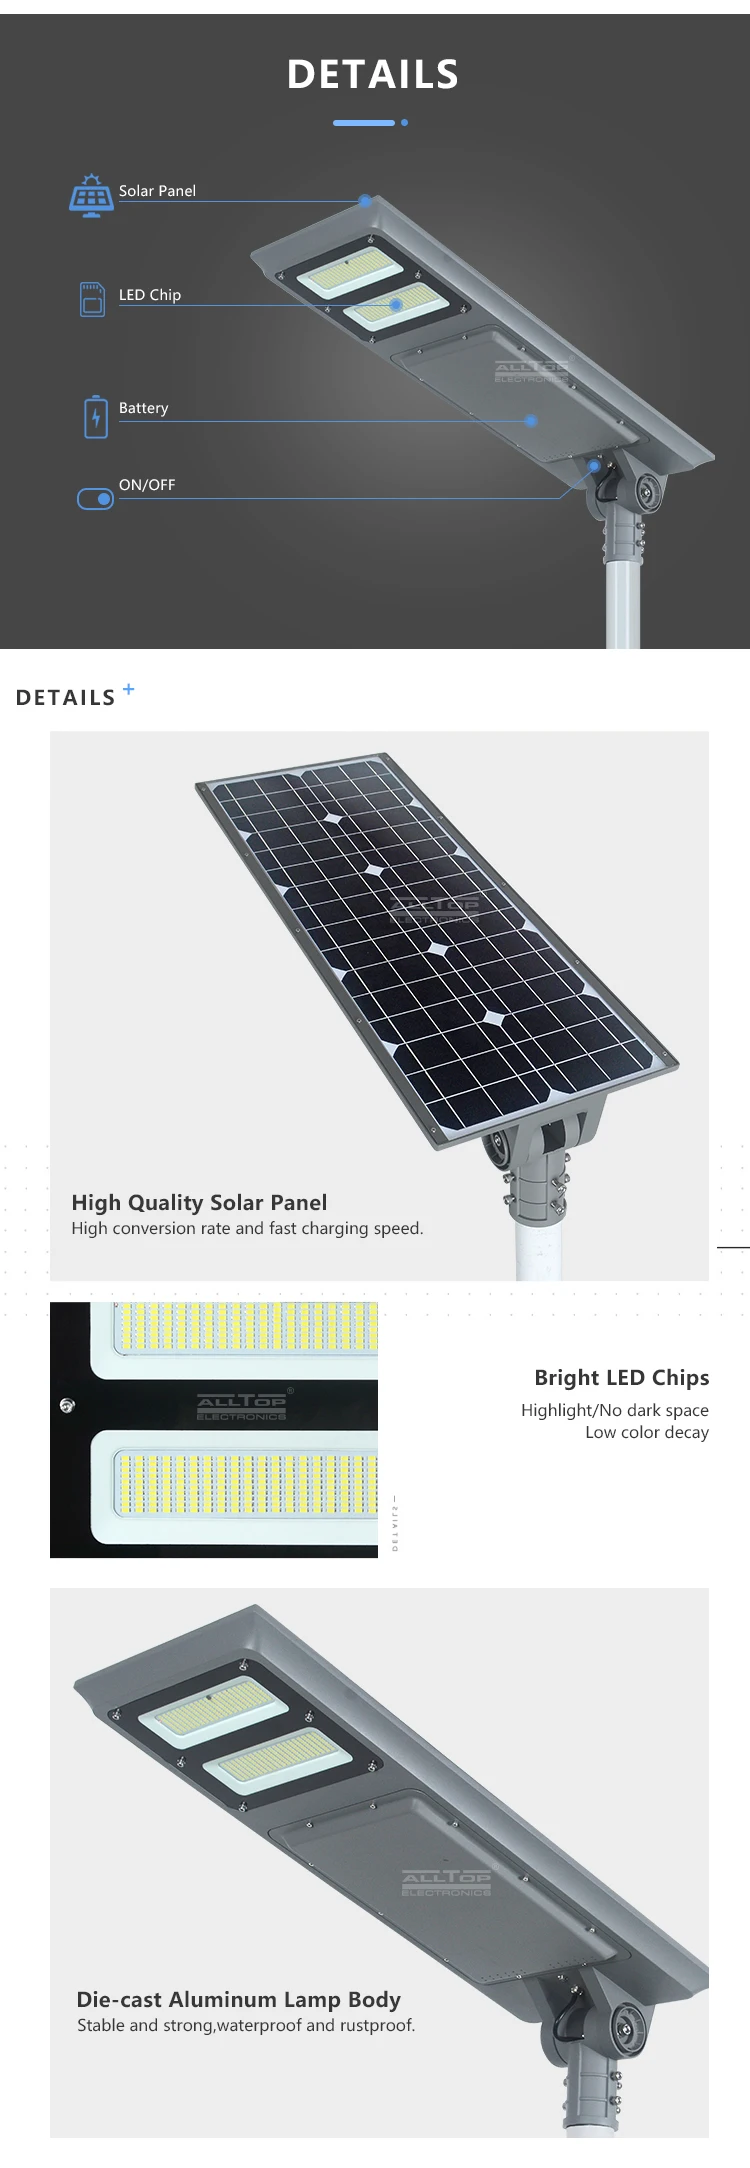 ALLTOP Waterproof ip65 outdoor 100w intergrated smd all in one solar led street light price